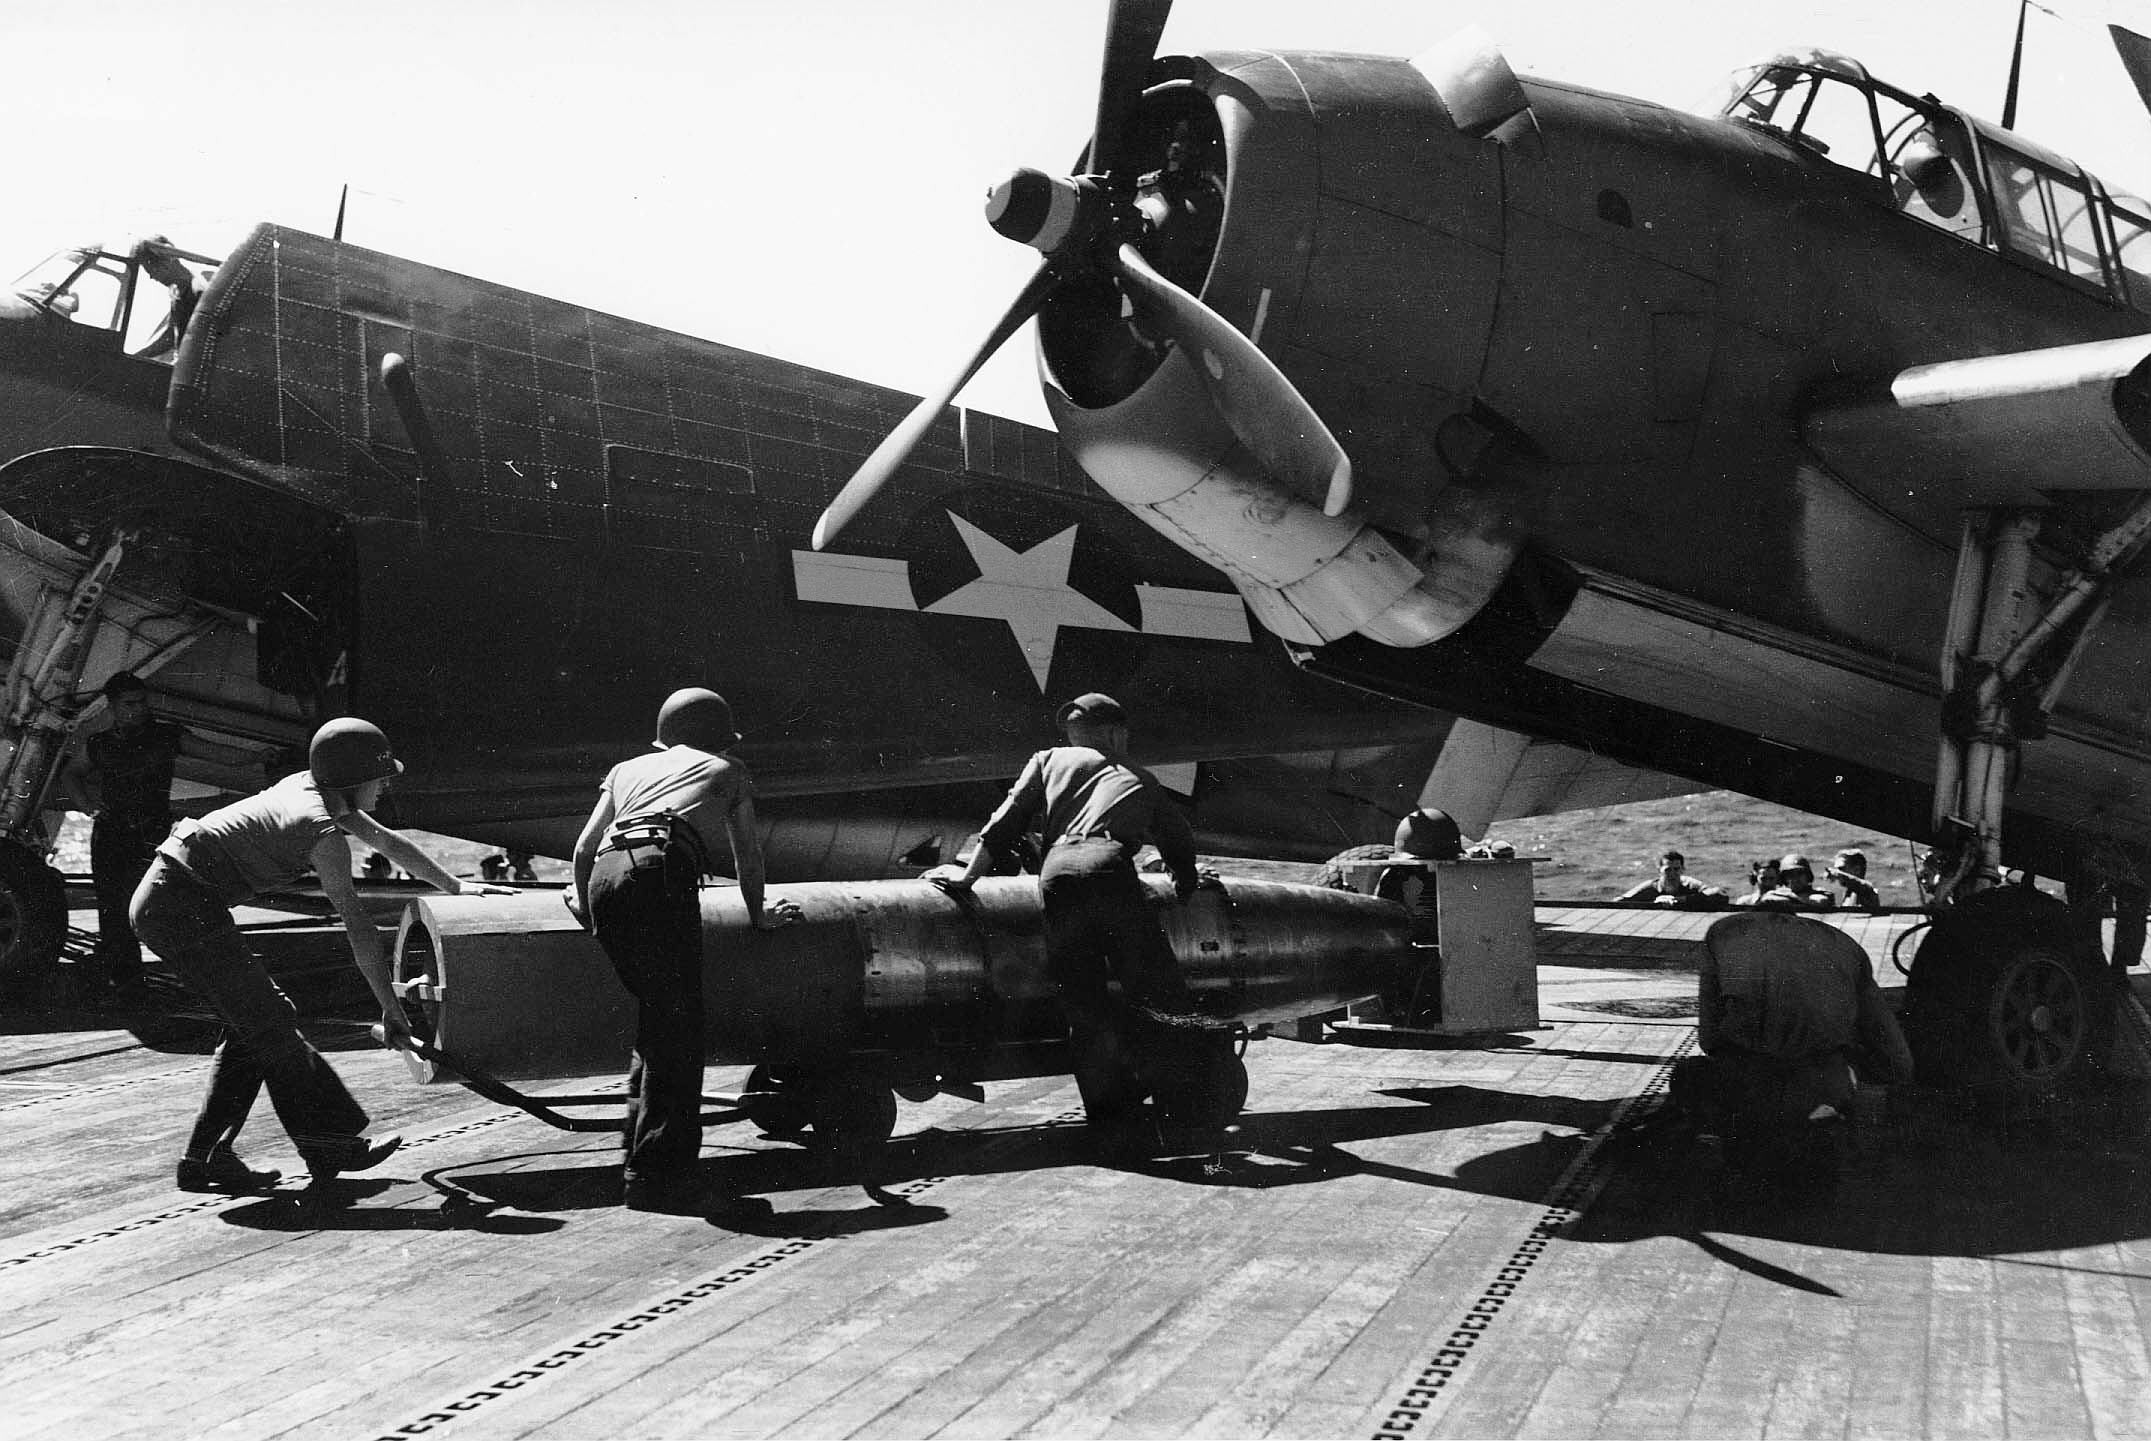 San Jacinto's VT-51 Avenger aircraft being armed with a Mark XIII torpedo for Battle off Cape Engaño, 25 Oct 1944